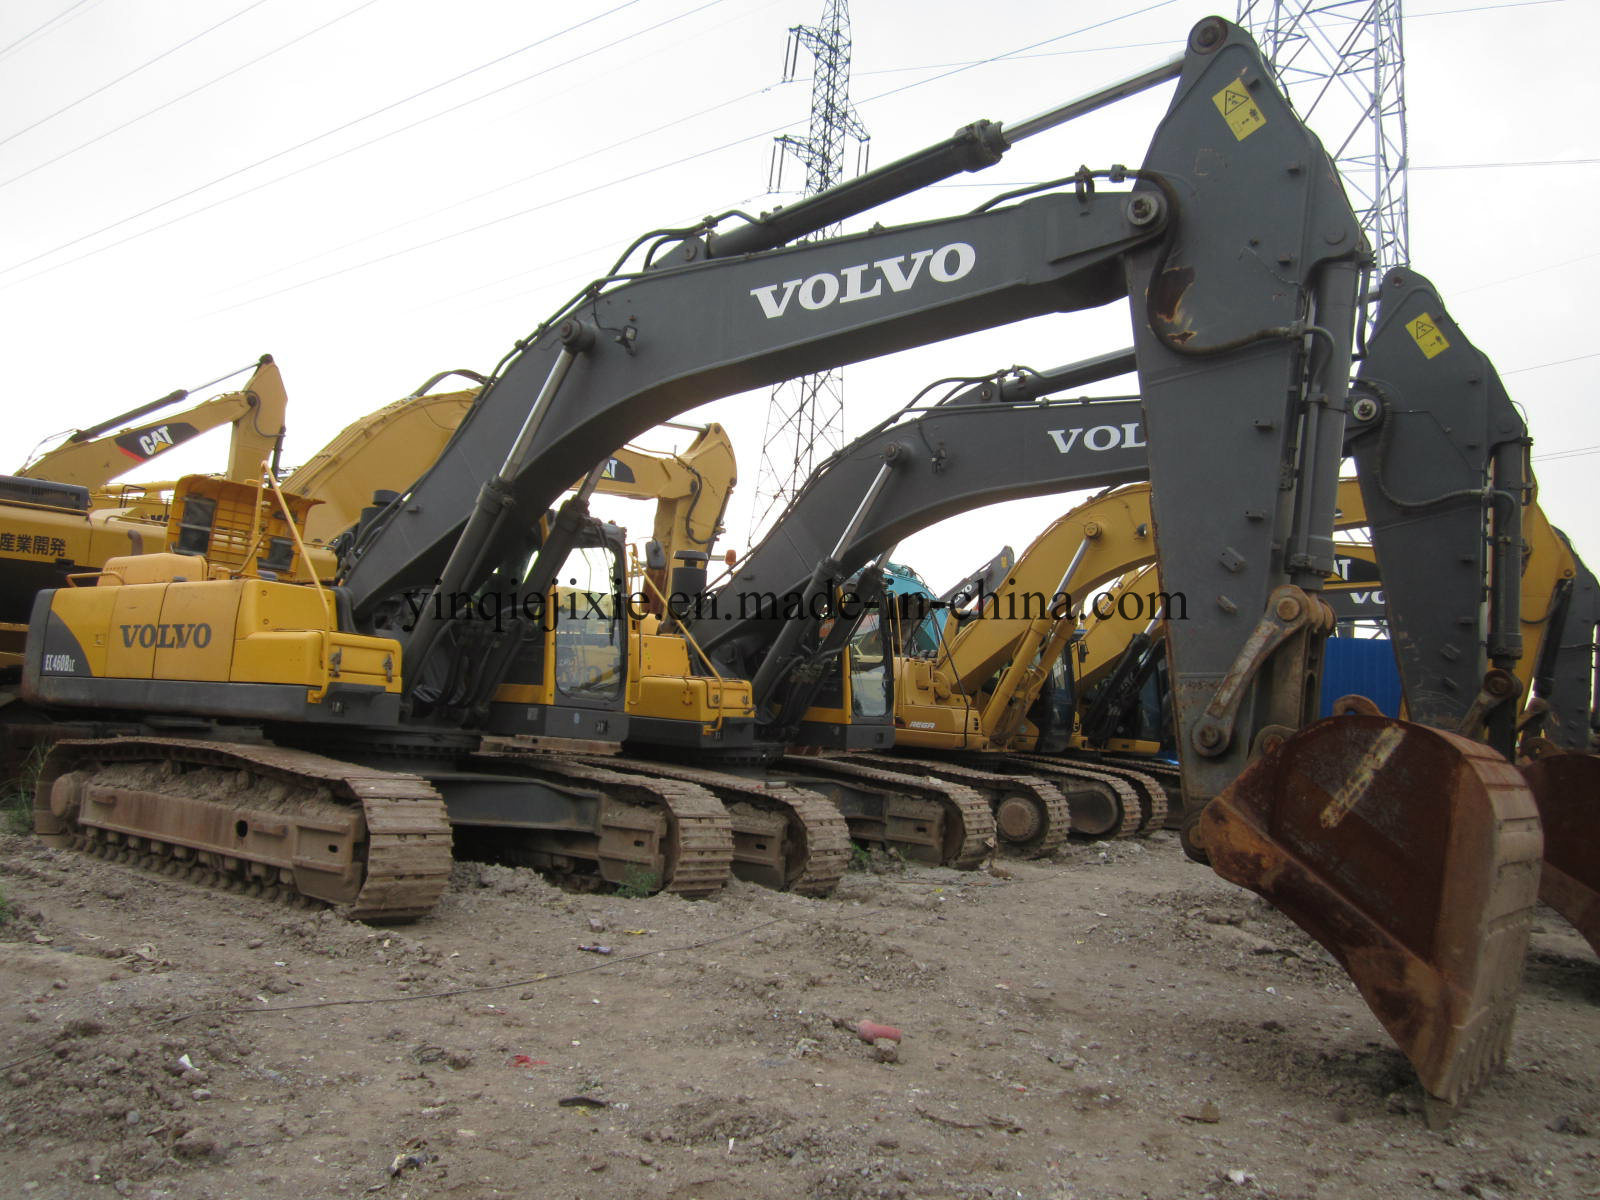 Used Volvo 360blc Excavator with Working Great in Hot Sale